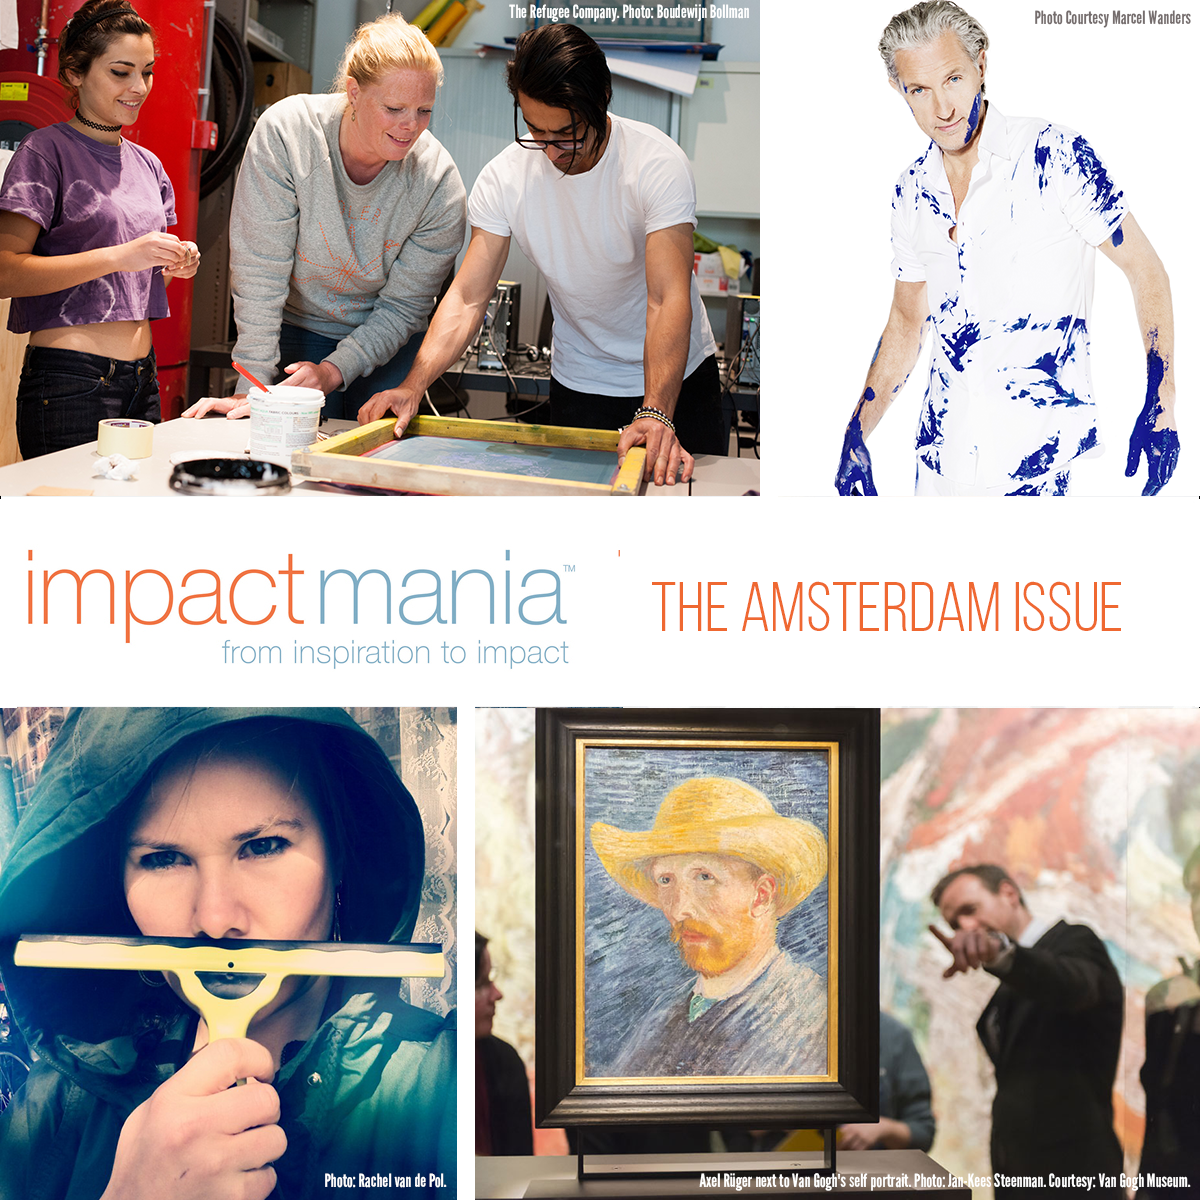 impactmania Amsterdam issue is out!